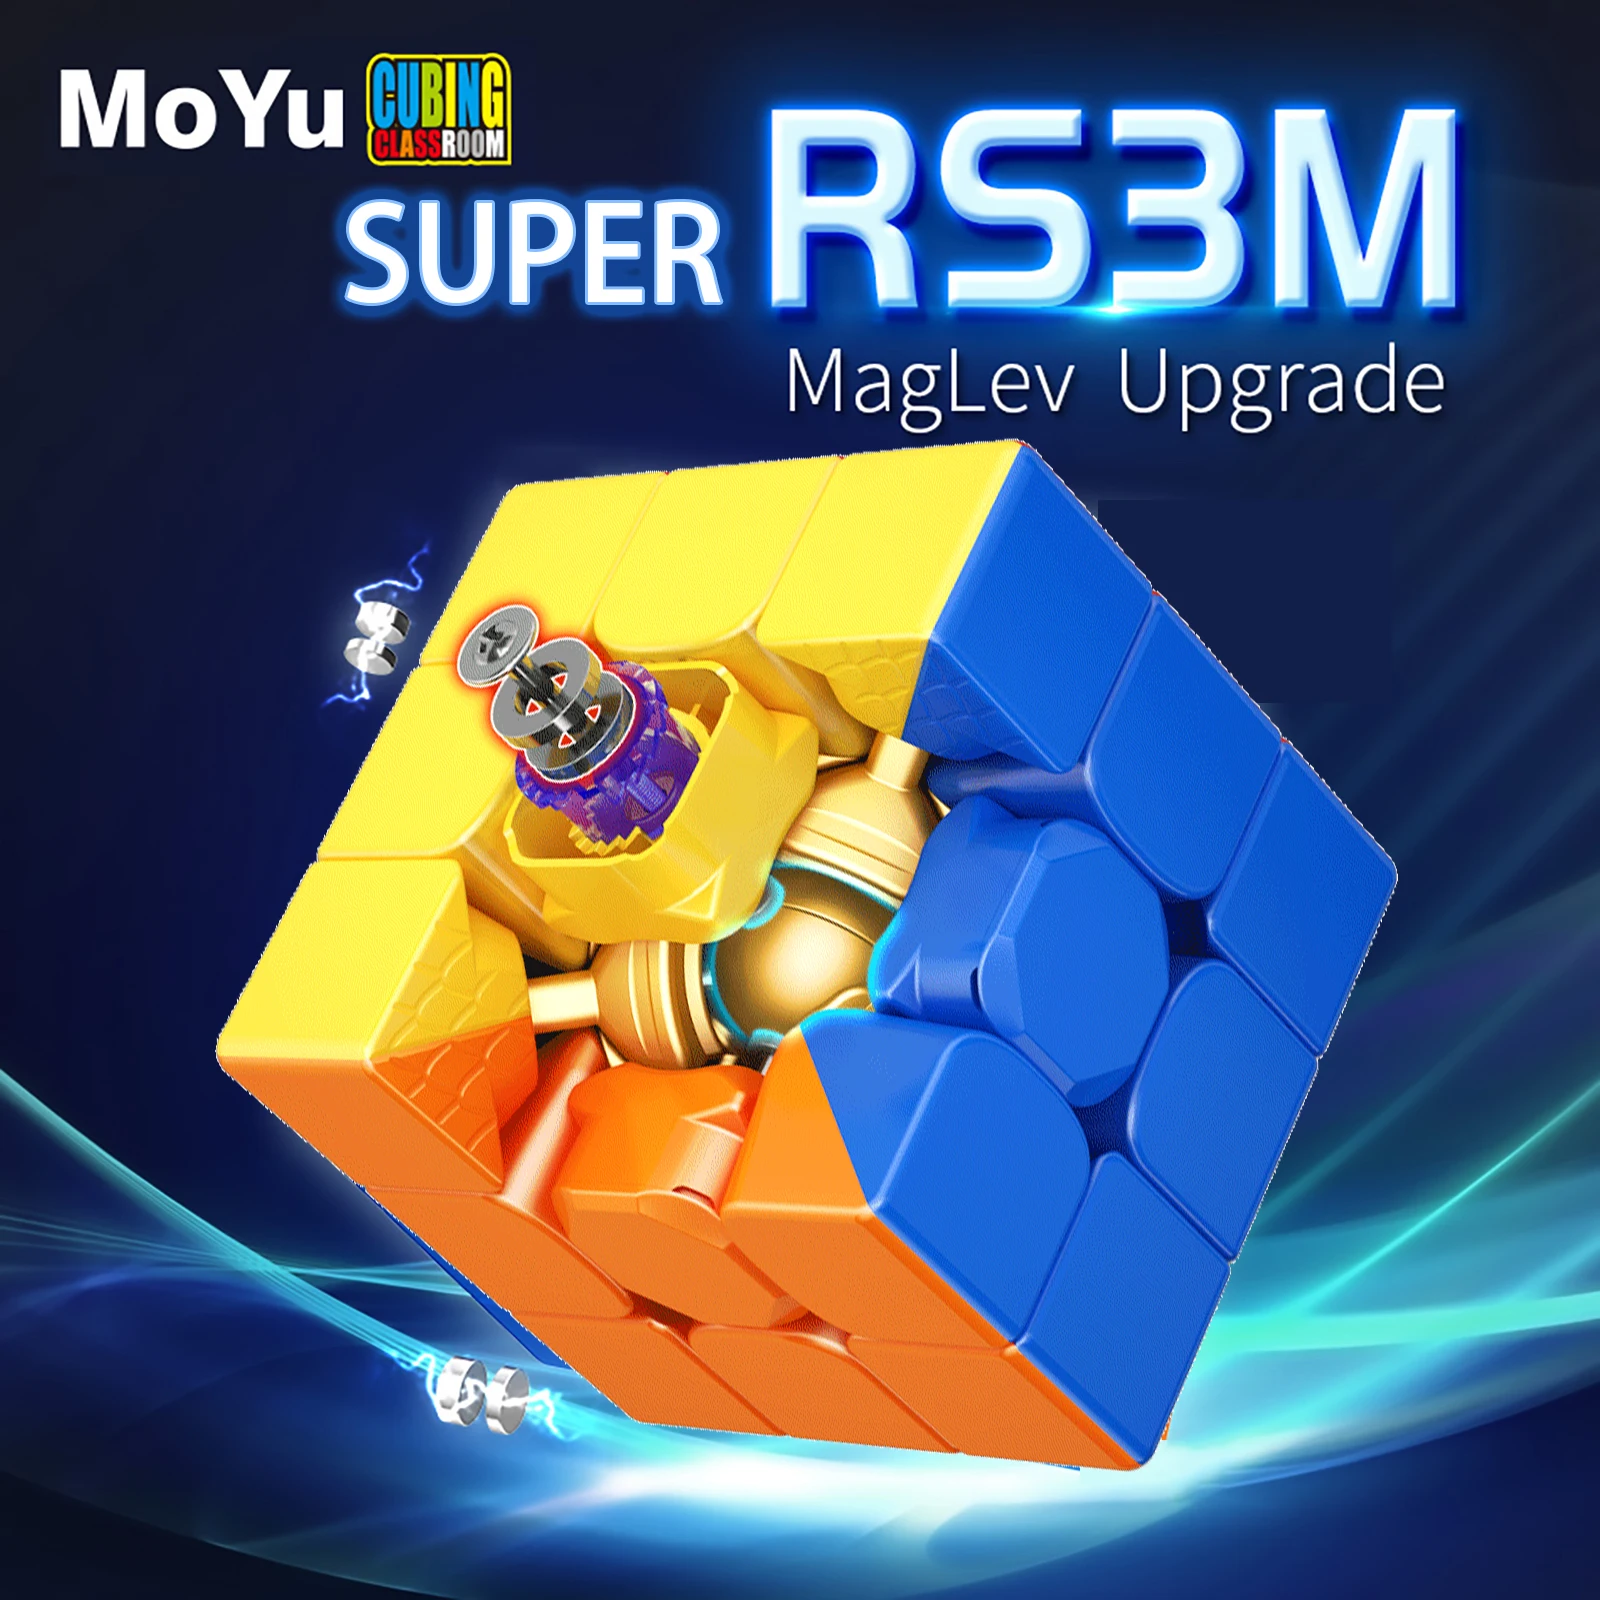 MoYu 3x3 Super RS3M Maglev Magic Cube 3x3 Magnetic Cubo Magico MEILONG3 Professional Speed Puzzle Children's Fidget Toys super slim pancake motor ok42sth20 104a xh400 for bmg extruder prusa i3 mk3s blv mgn cube v2 4 voron 2 4 switchwire